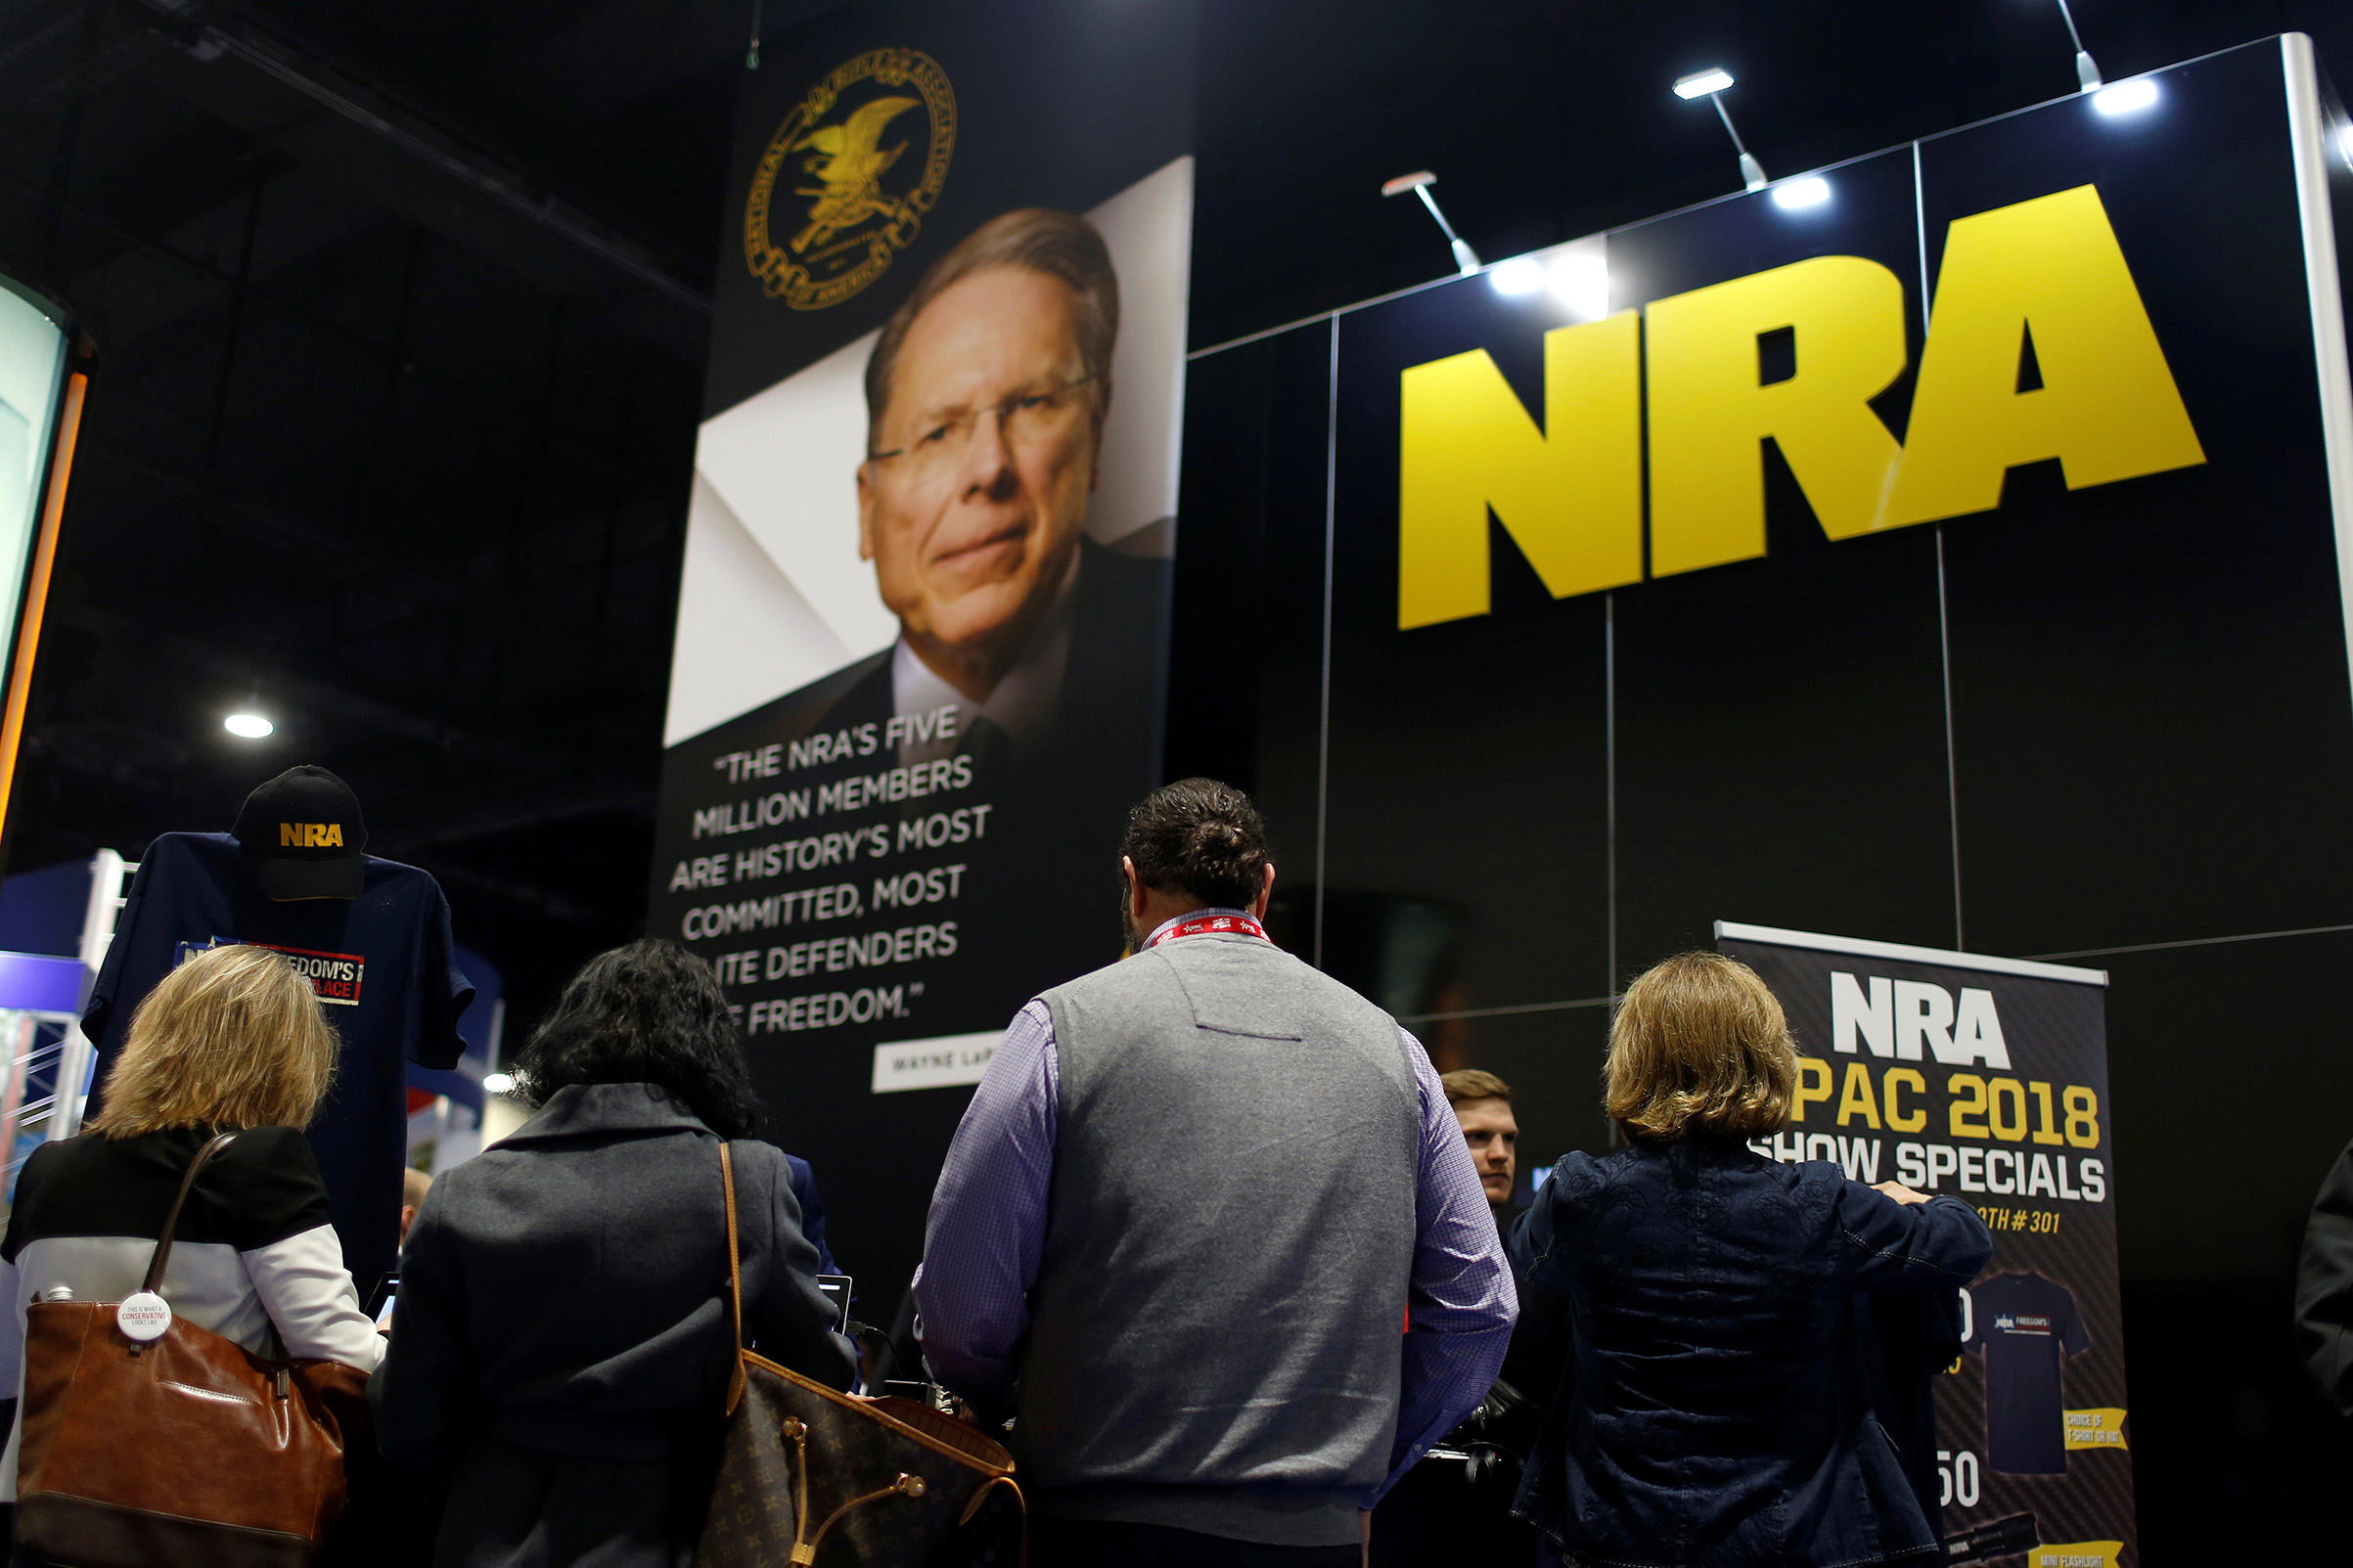 People sign up at the booth for the National Rifle Association (NRA) at the Conservative Political Action Conference (CPAC) at National Harbor, Maryland